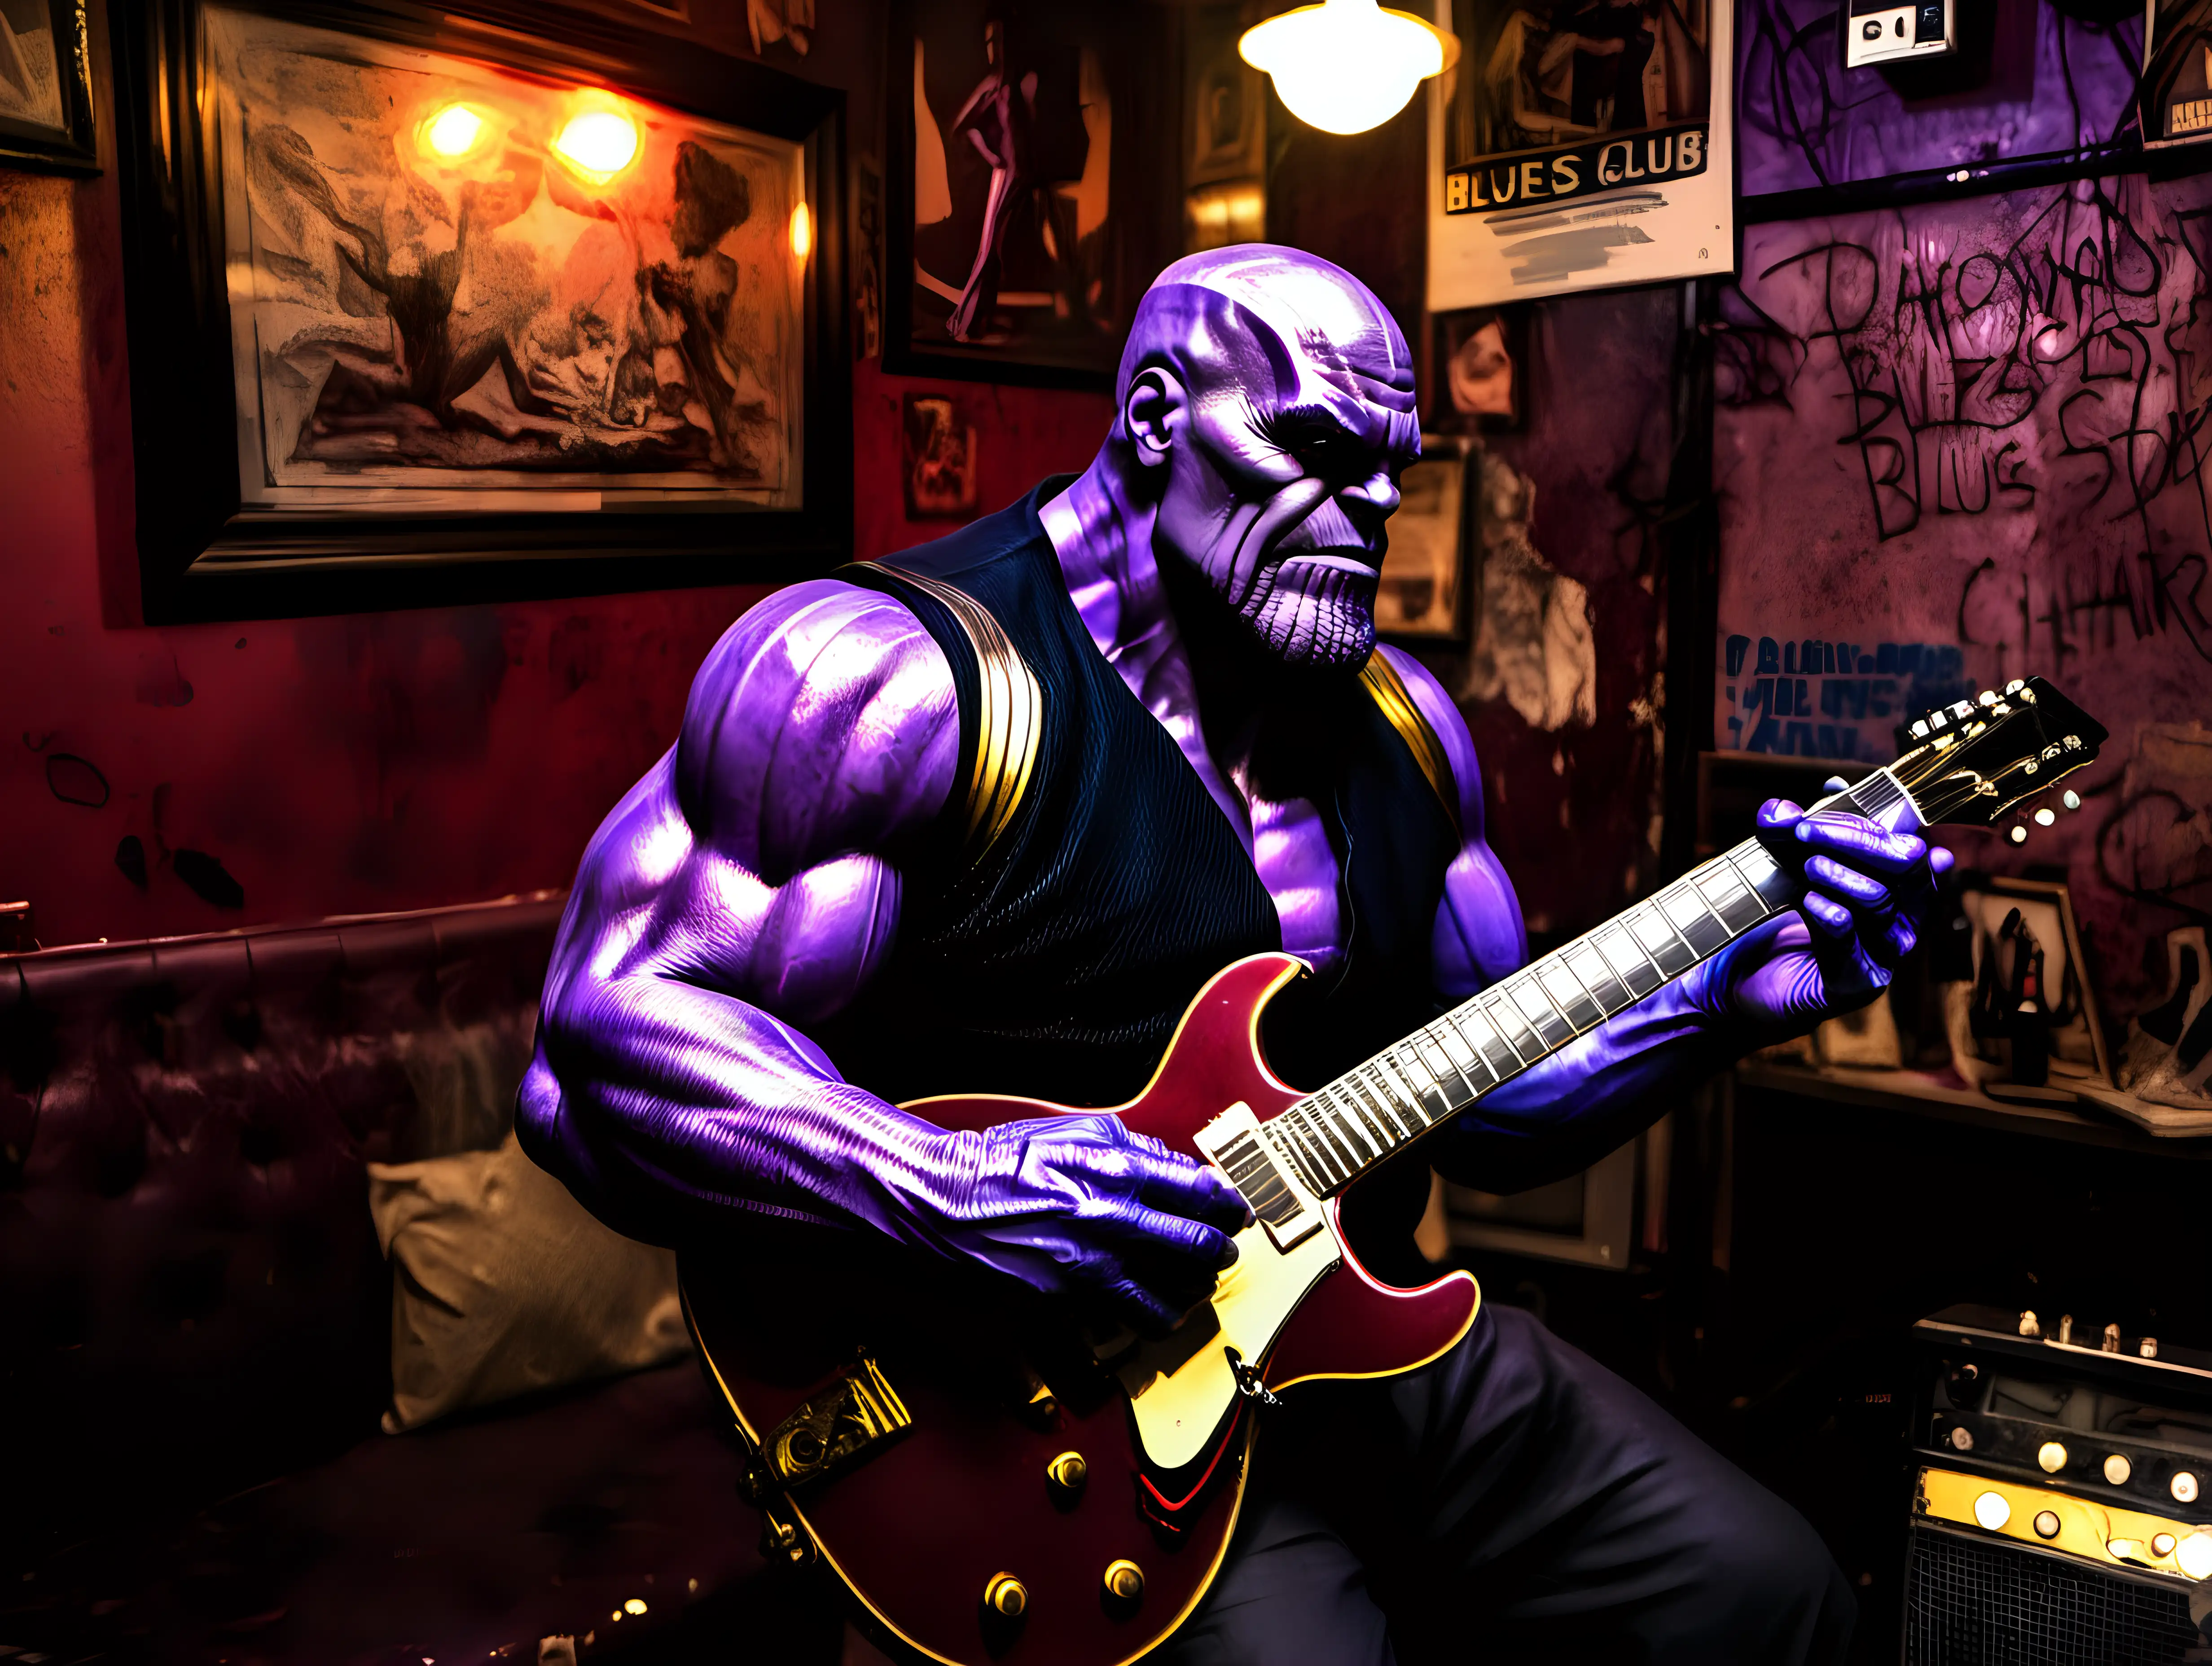  Thanos playing blues guitar in an old NYC blues club in the bowery